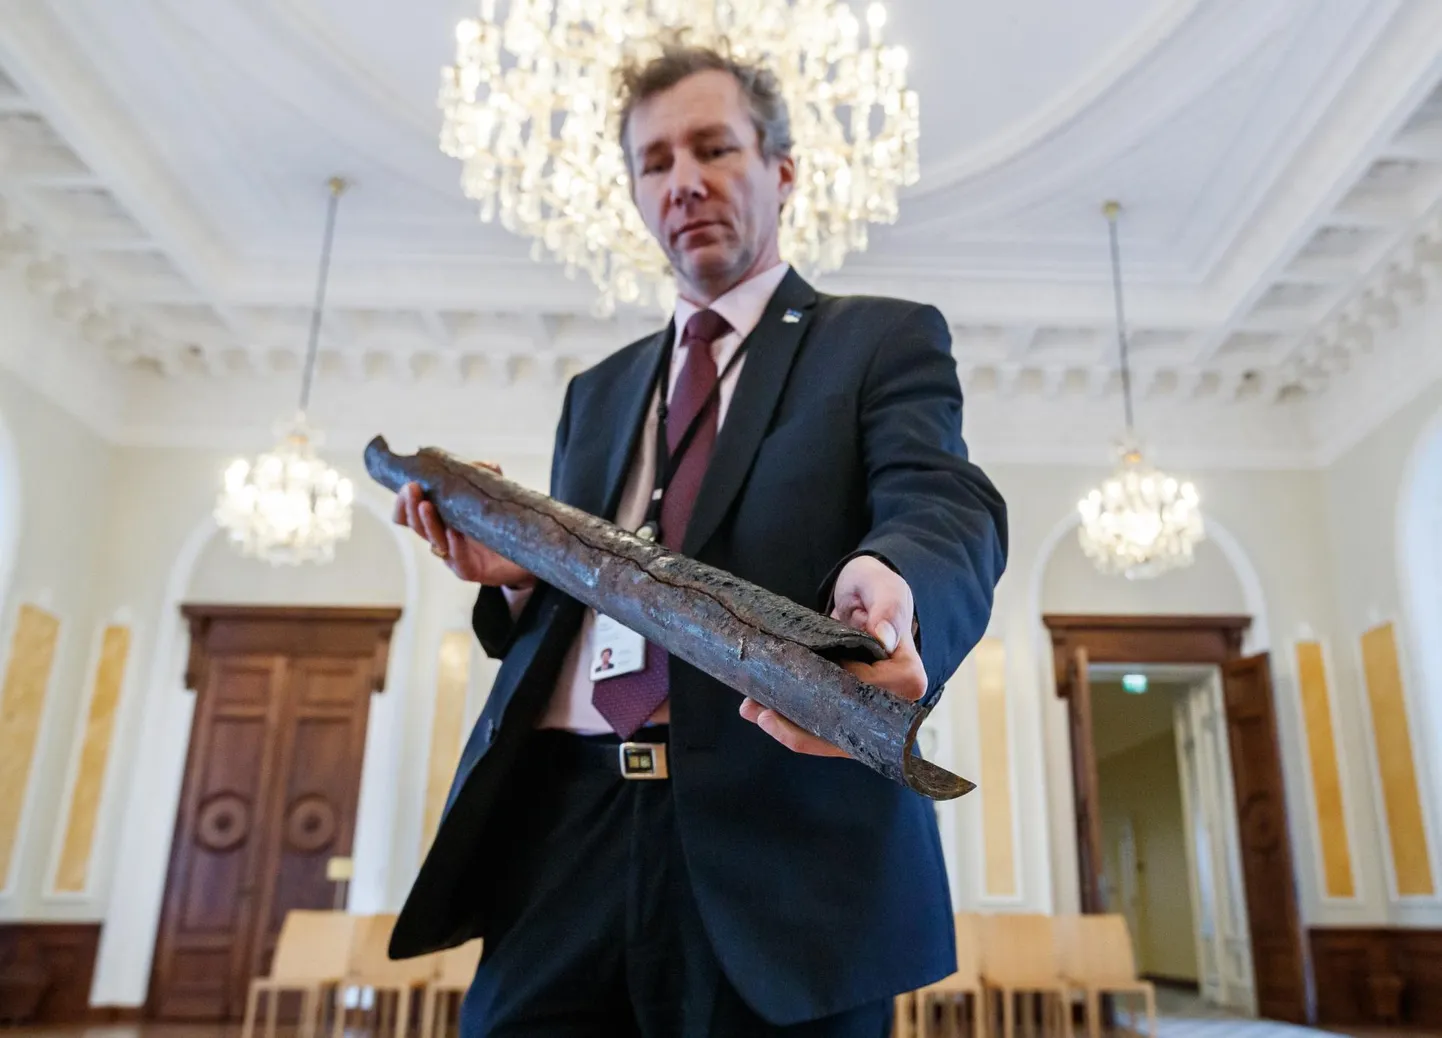 The greatest concern is caused by the heating and sewerage pipes built in the walls and floors as there are no definite plans of their location. Argo Koppel, head of the Riigikogu office economic department.